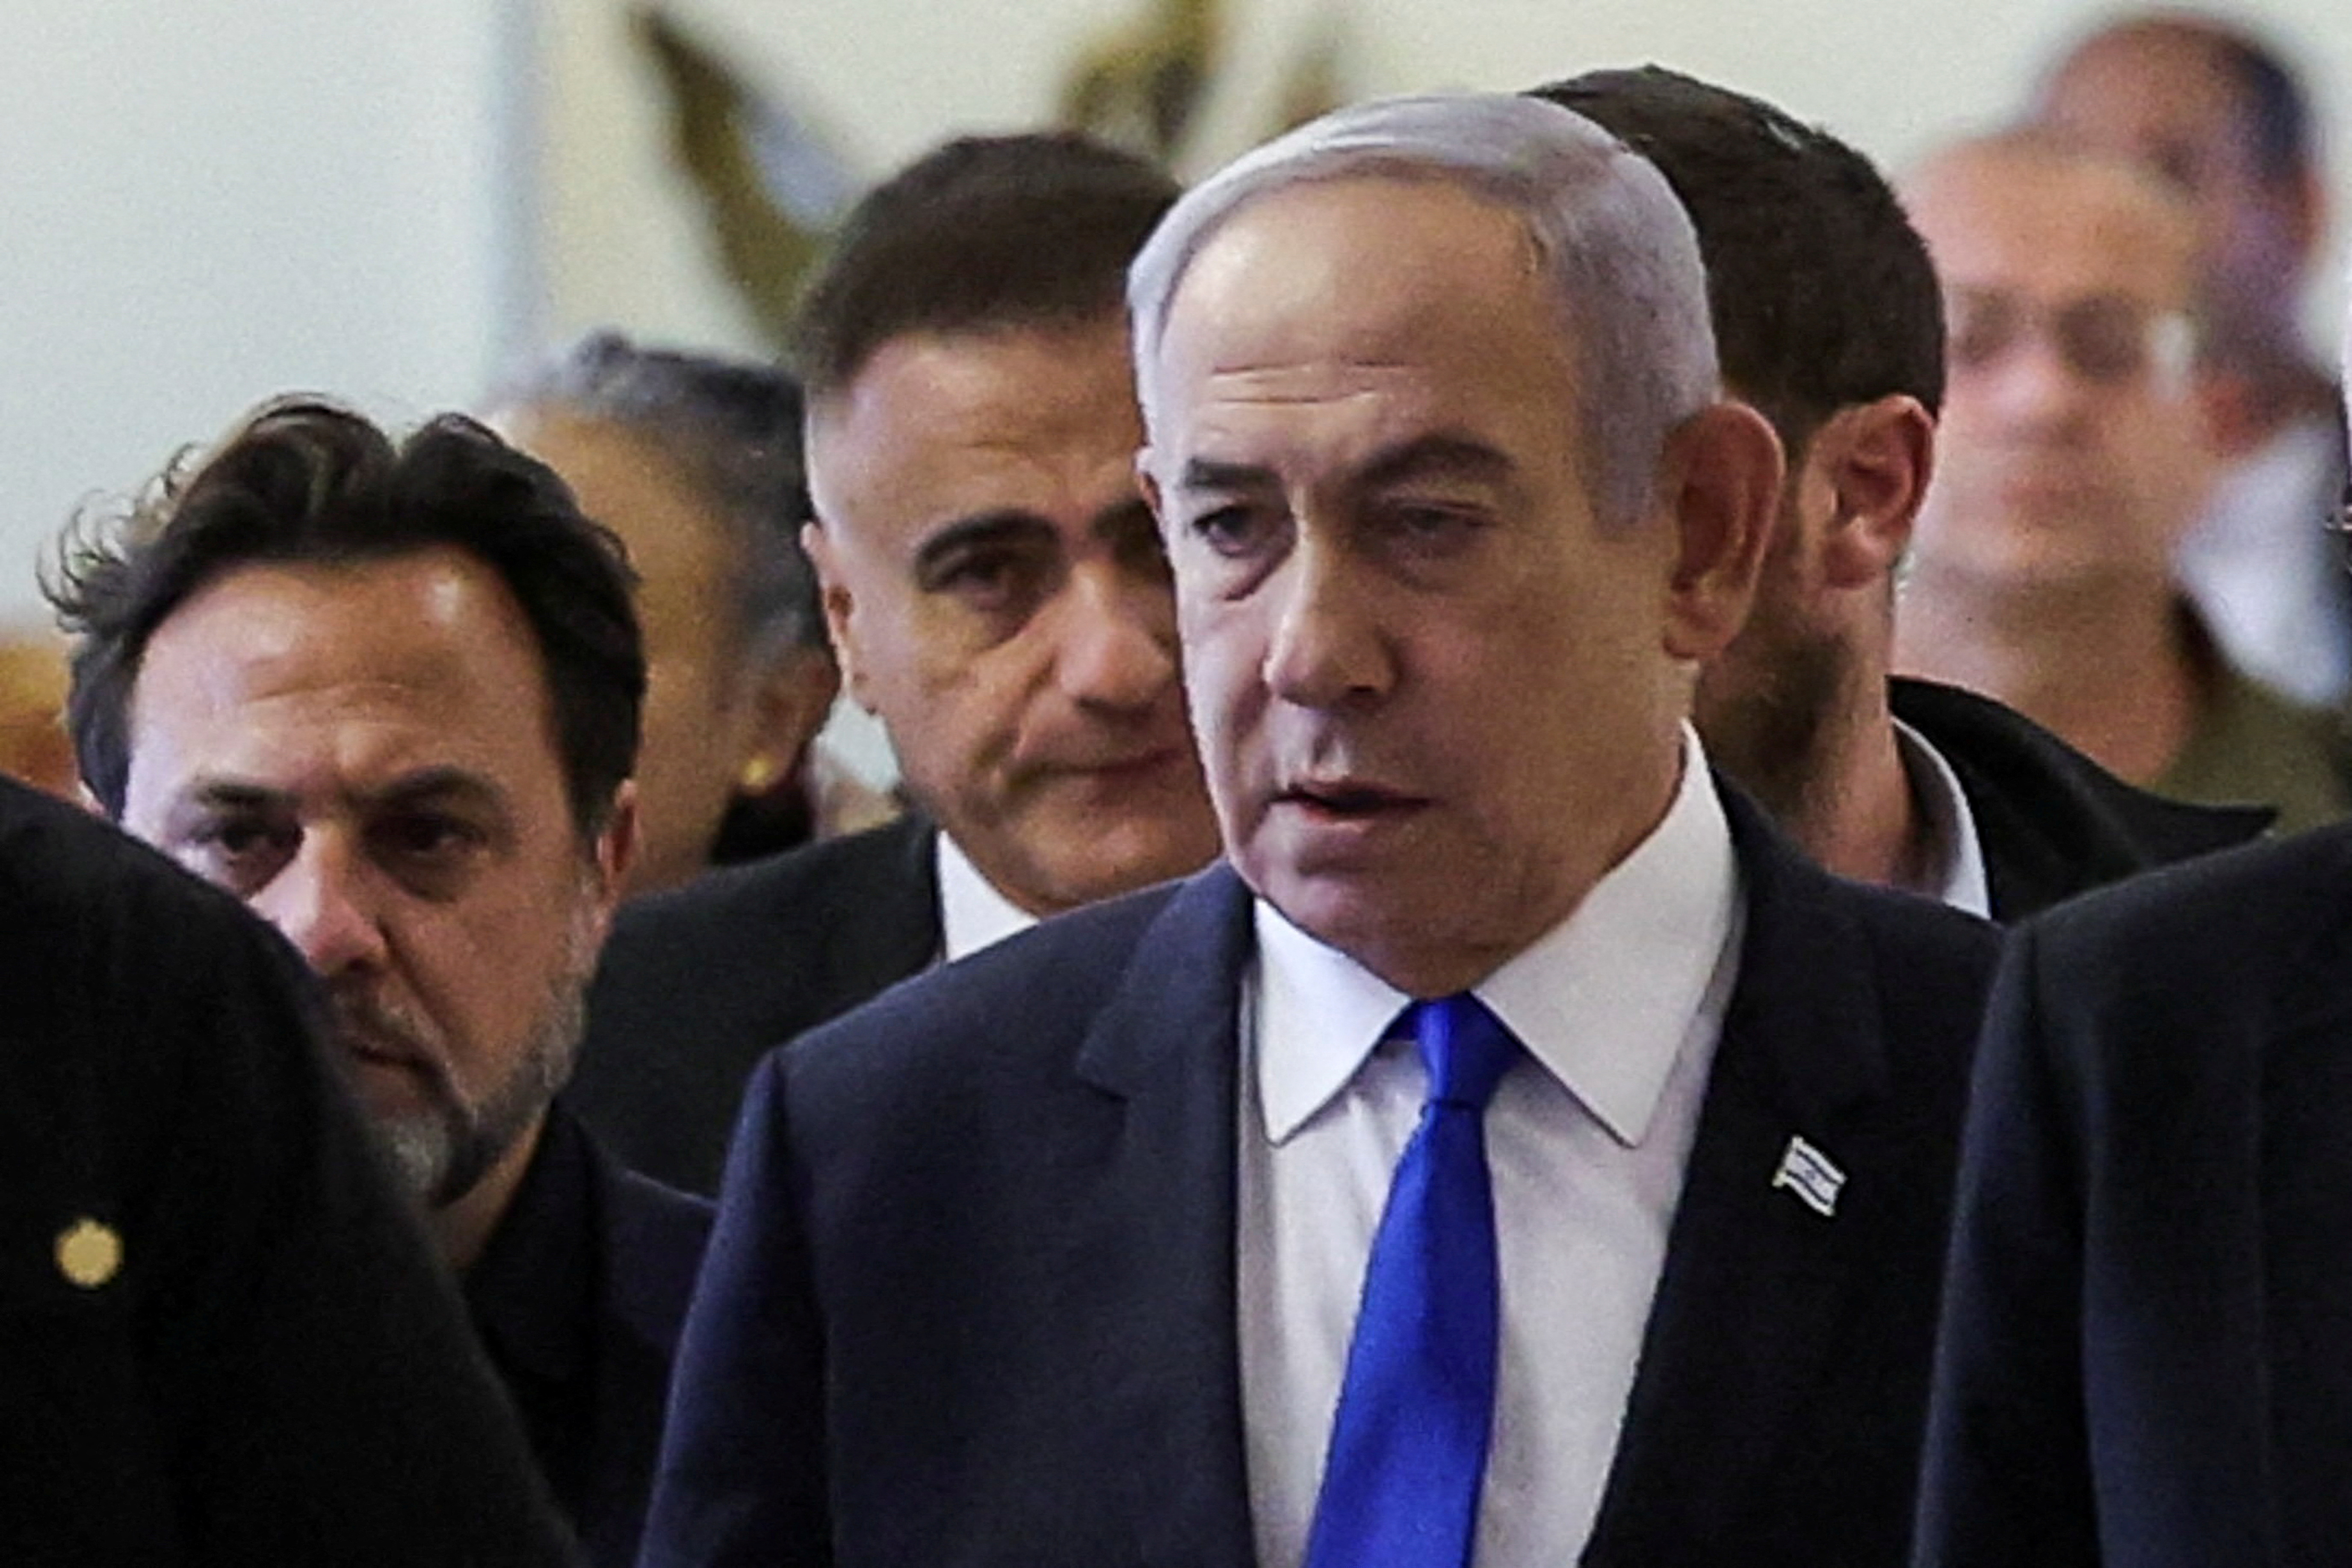 Israeli Prime Minister Netanyahu arrives at his Likud party faction meeting at the Knesset,in Jerusalem